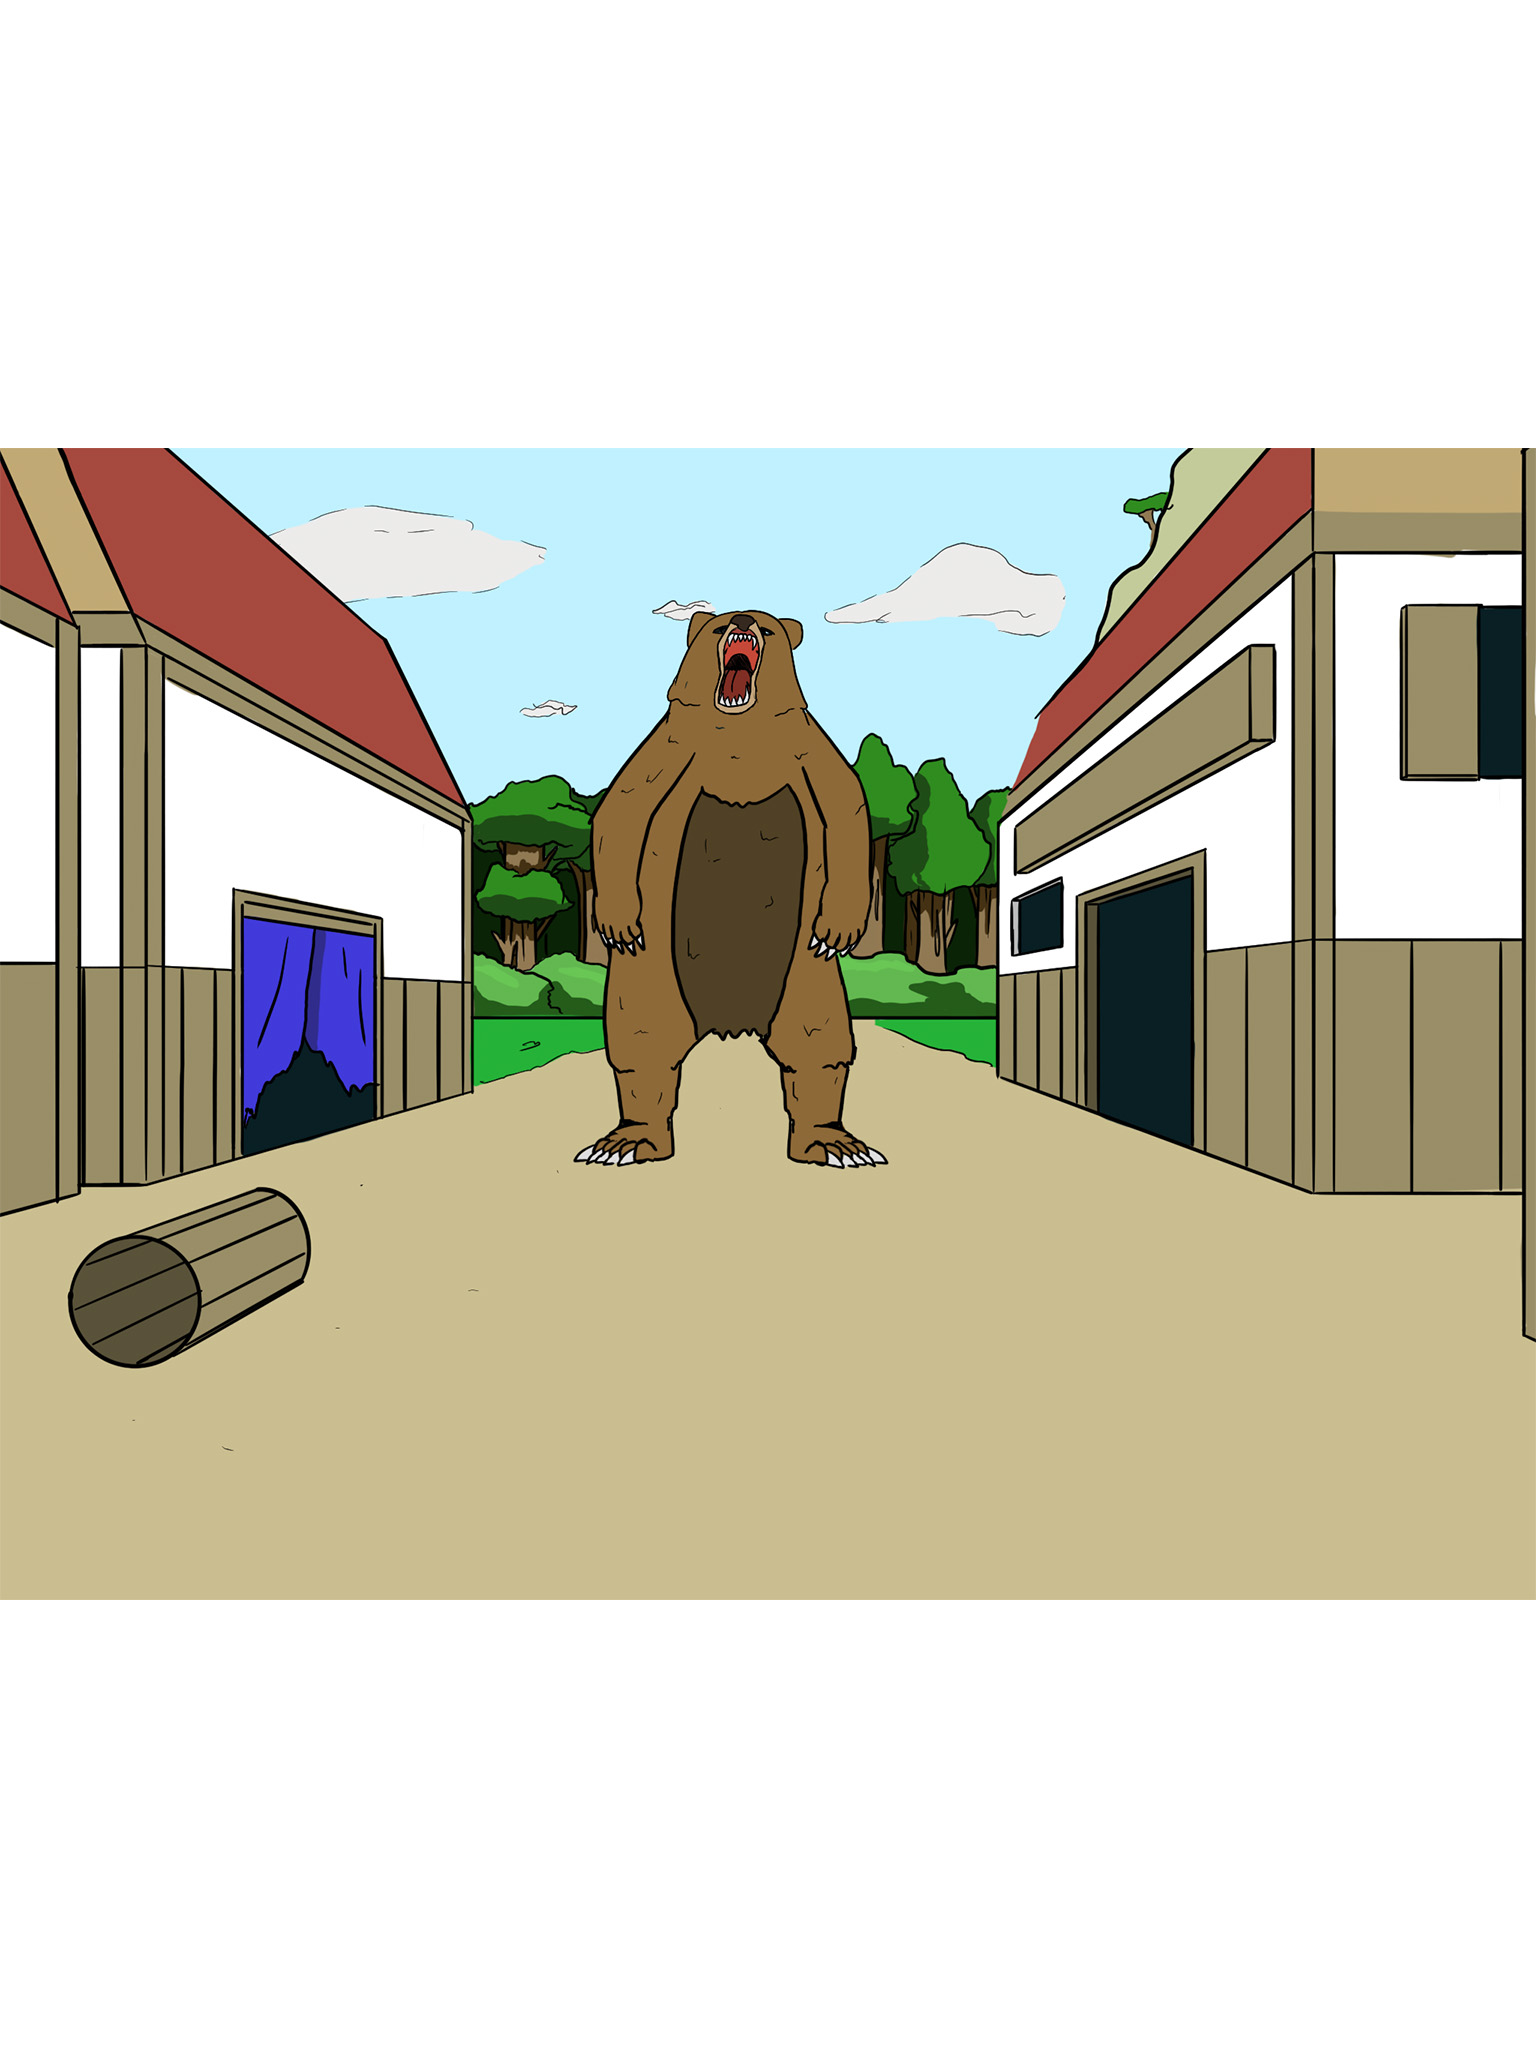  / Still of Bear from "The Power of Music," is a 3-minute short 16:9 HD animation created using ToonBoom, Procreate, and AfterEffects